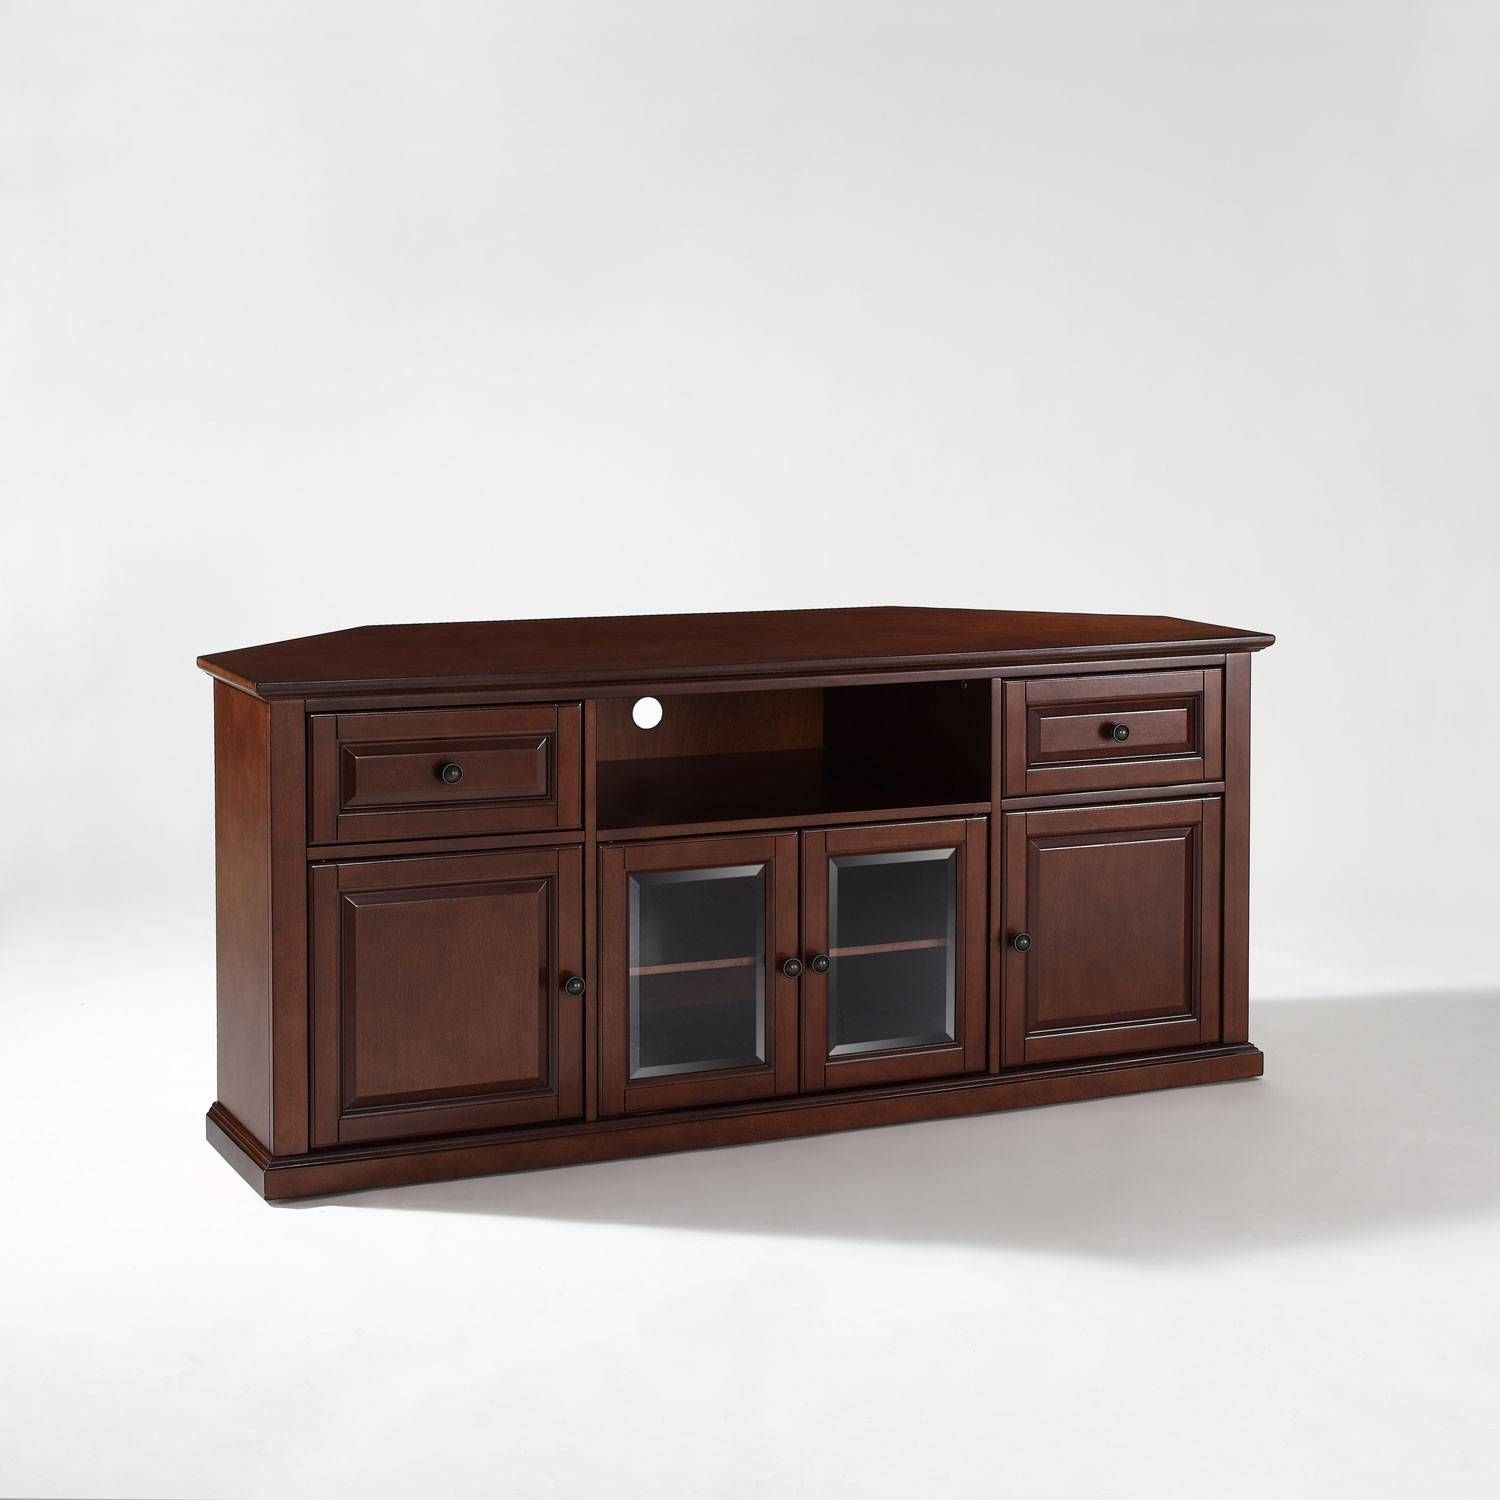 Tv Stands & Cabinets On Sale | Bellacor With Regard To Large Corner Tv Cabinets (View 10 of 15)